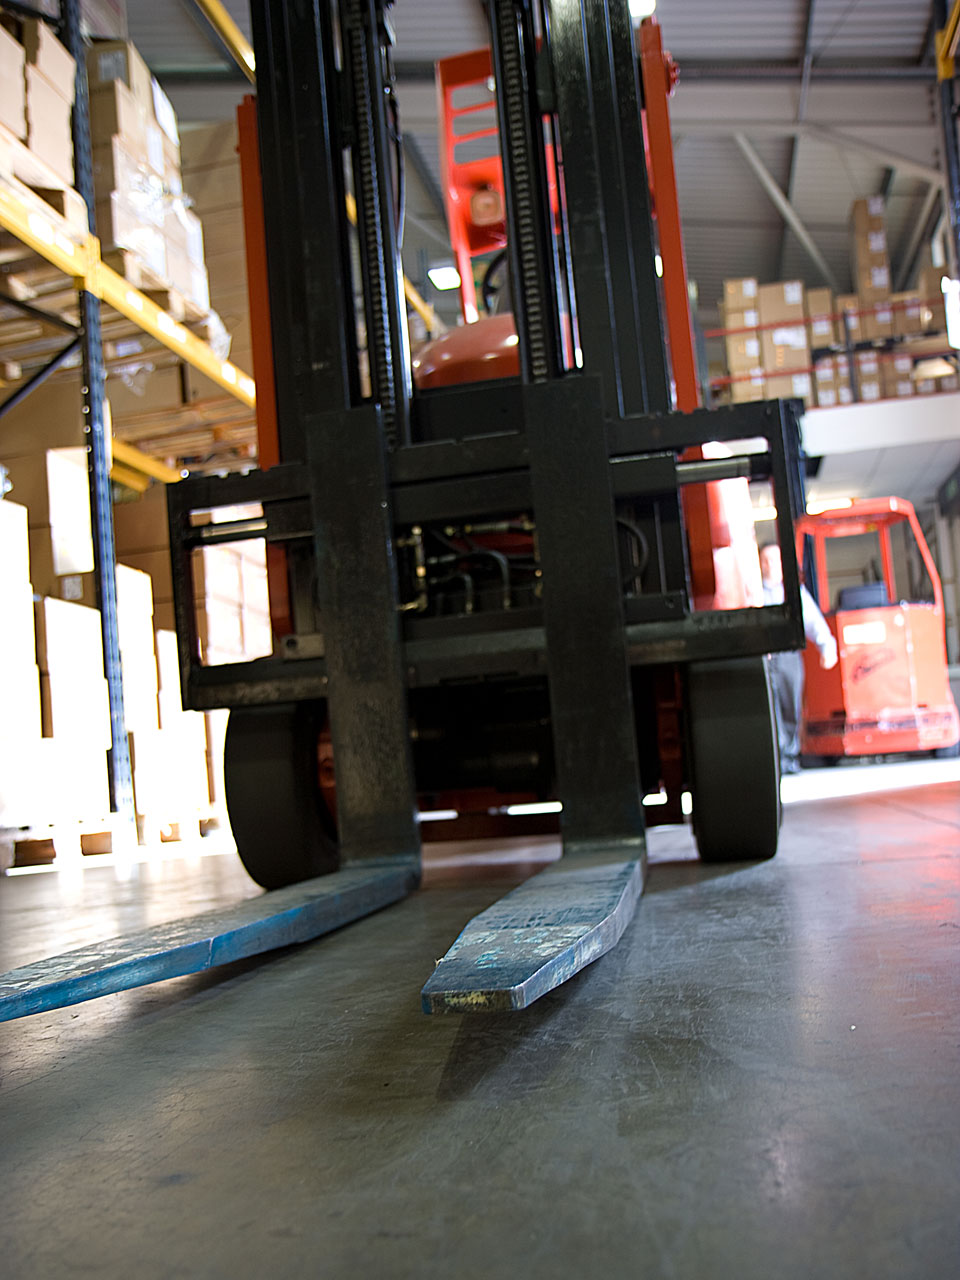 A forklift in the warehouse